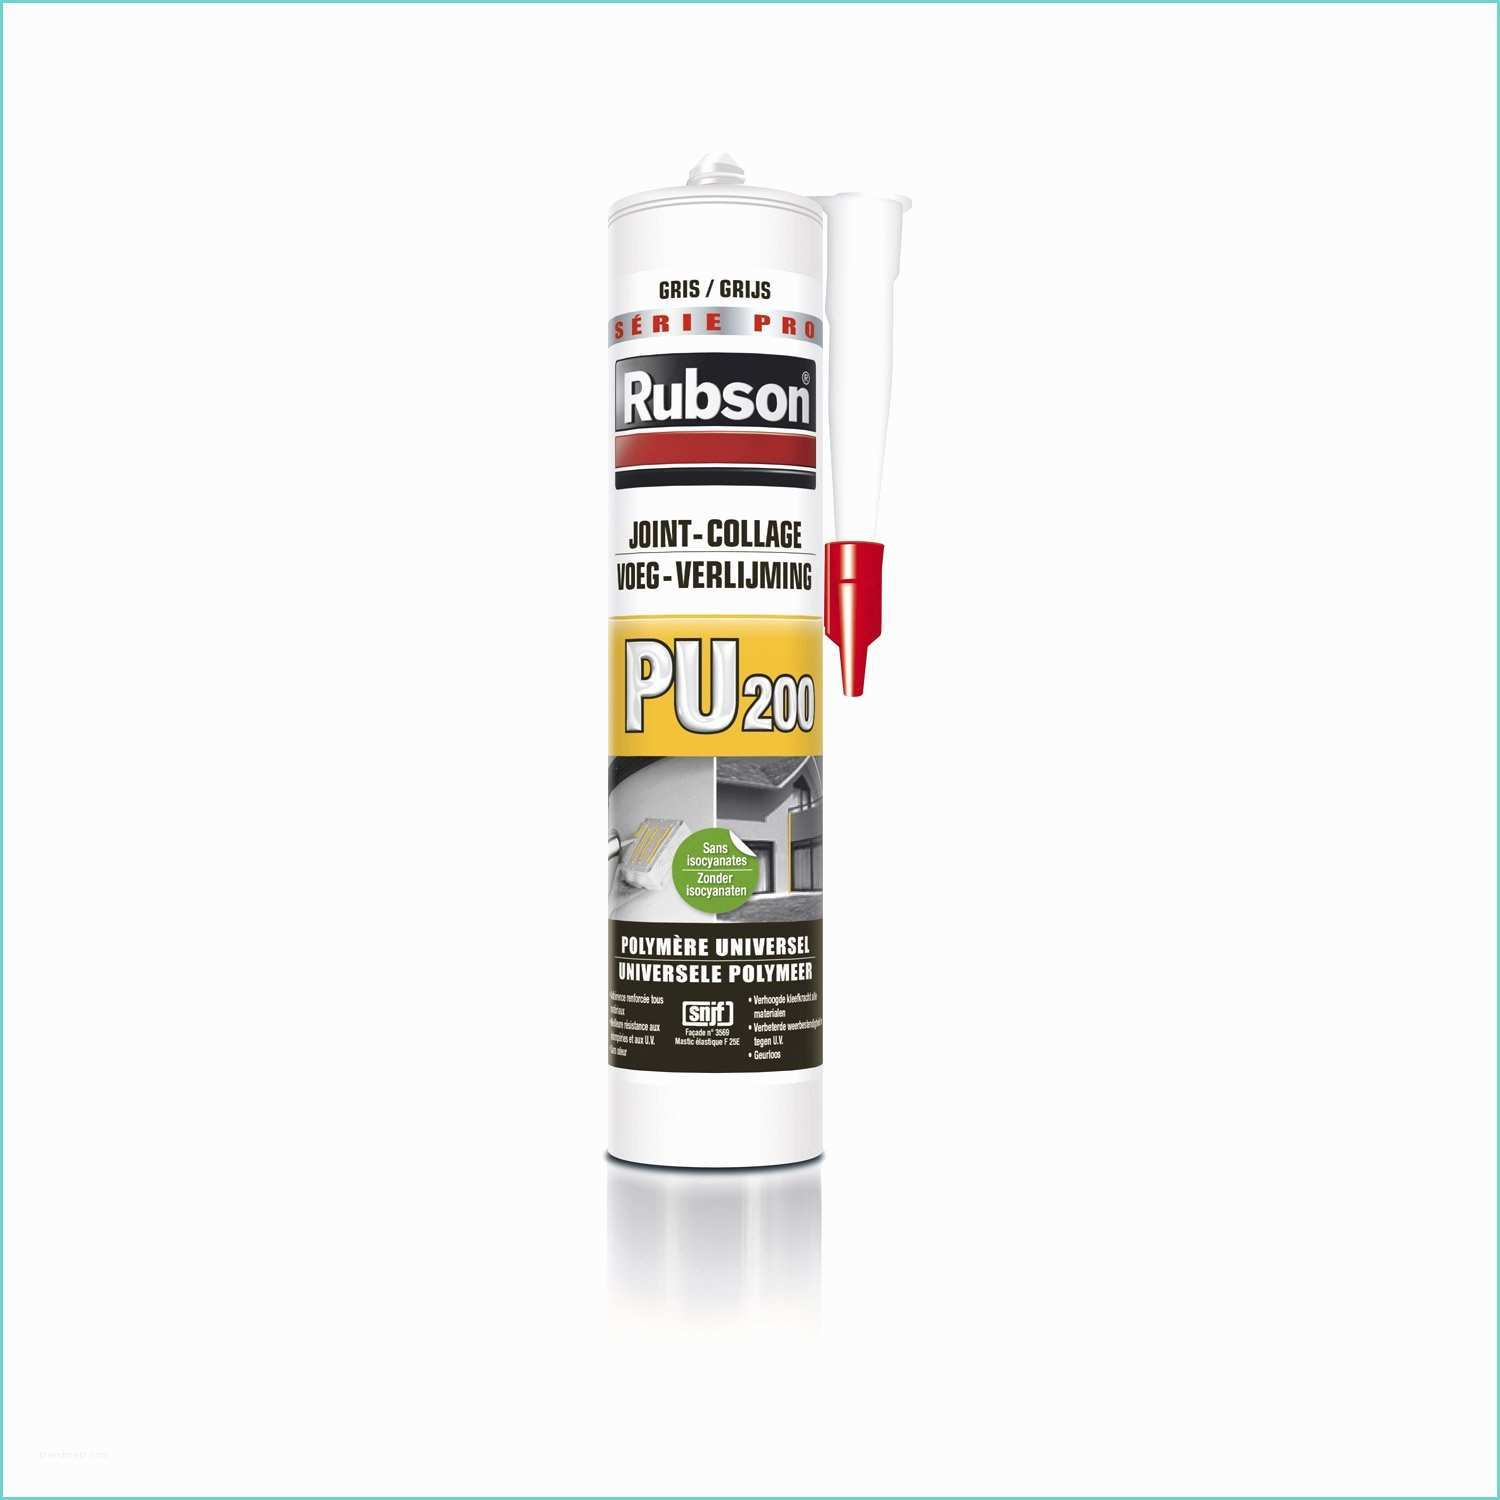 Mastic Bois Leroy Merlin Mastic Joint Colle Pu200 Gris Rubson 280 Ml